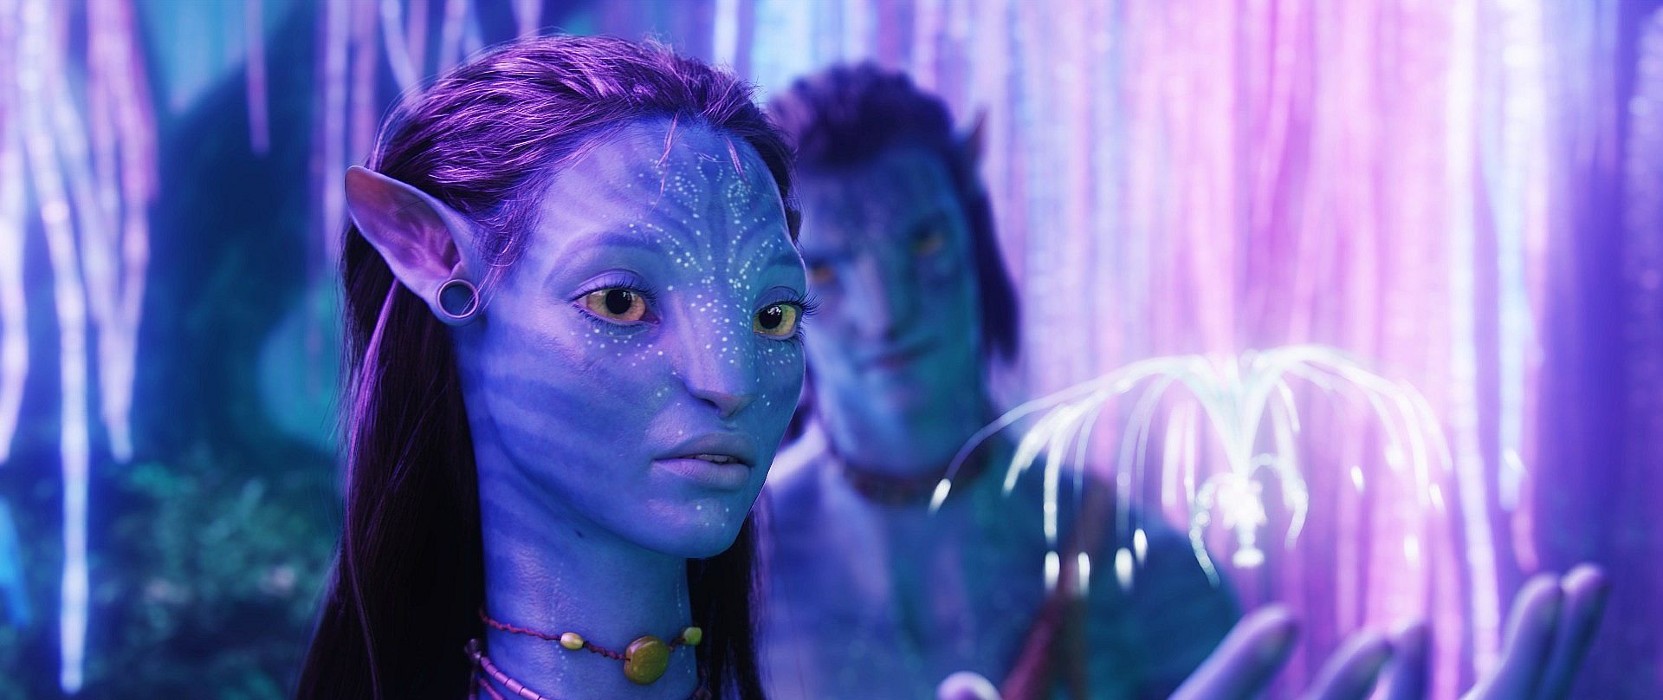 Avatar in cinemas again. I’ve already watched the new version, here are my impressions